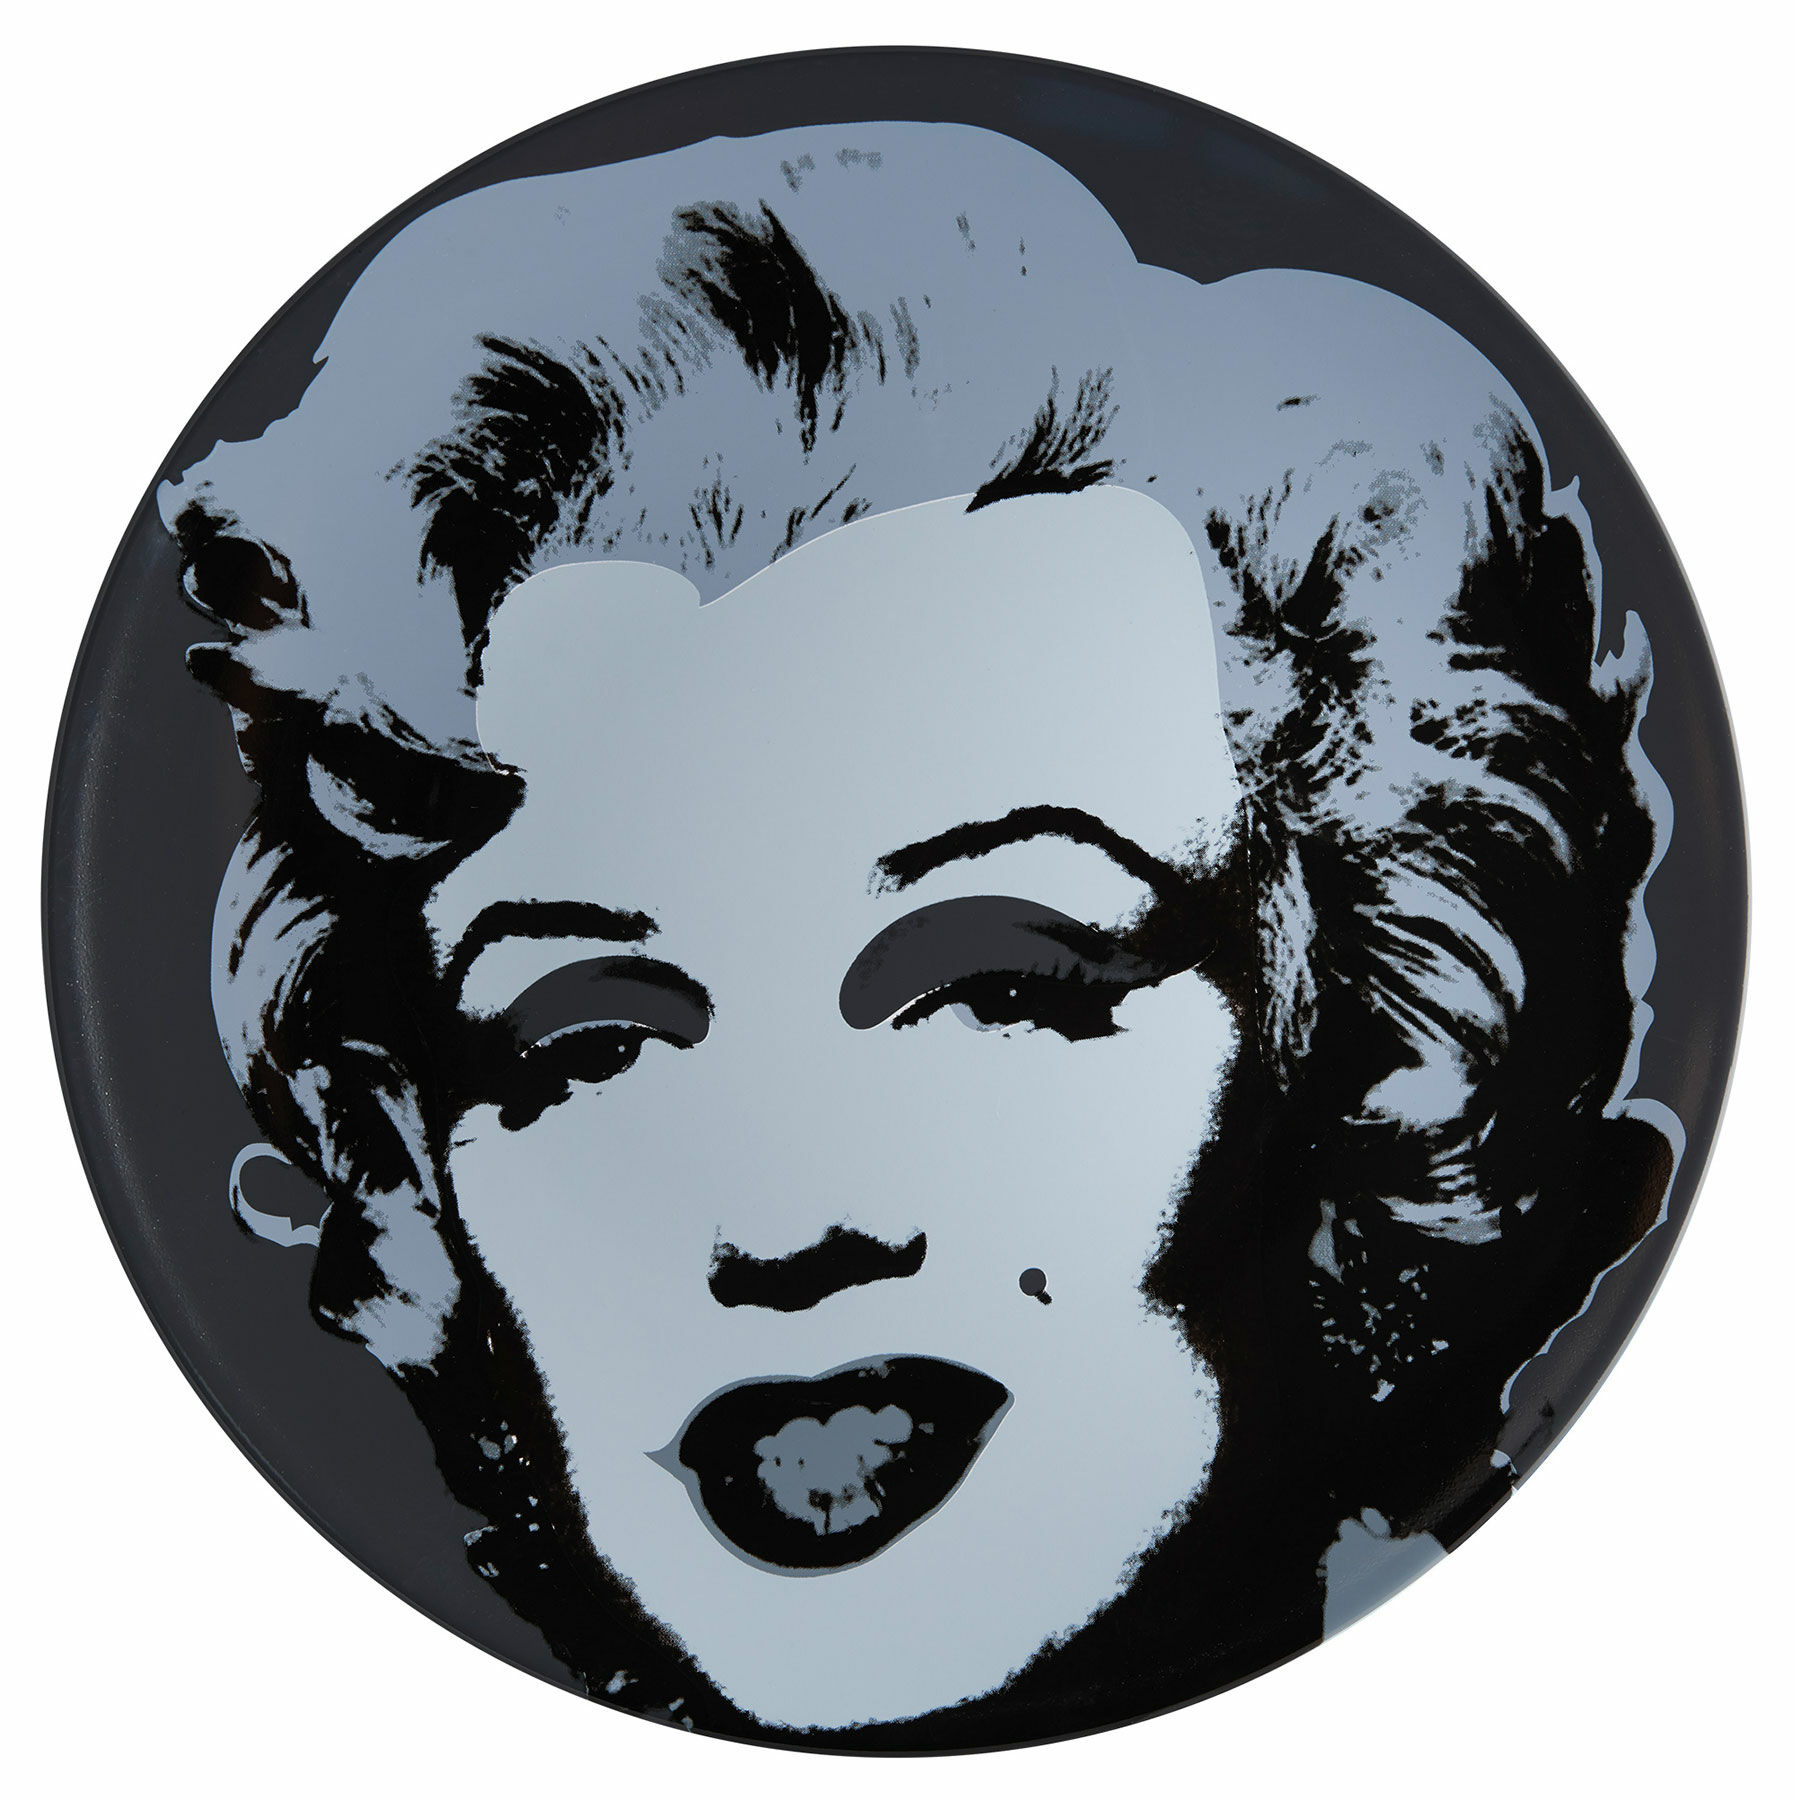 Porcelain plate "Marilyn" (black/white) by Andy Warhol